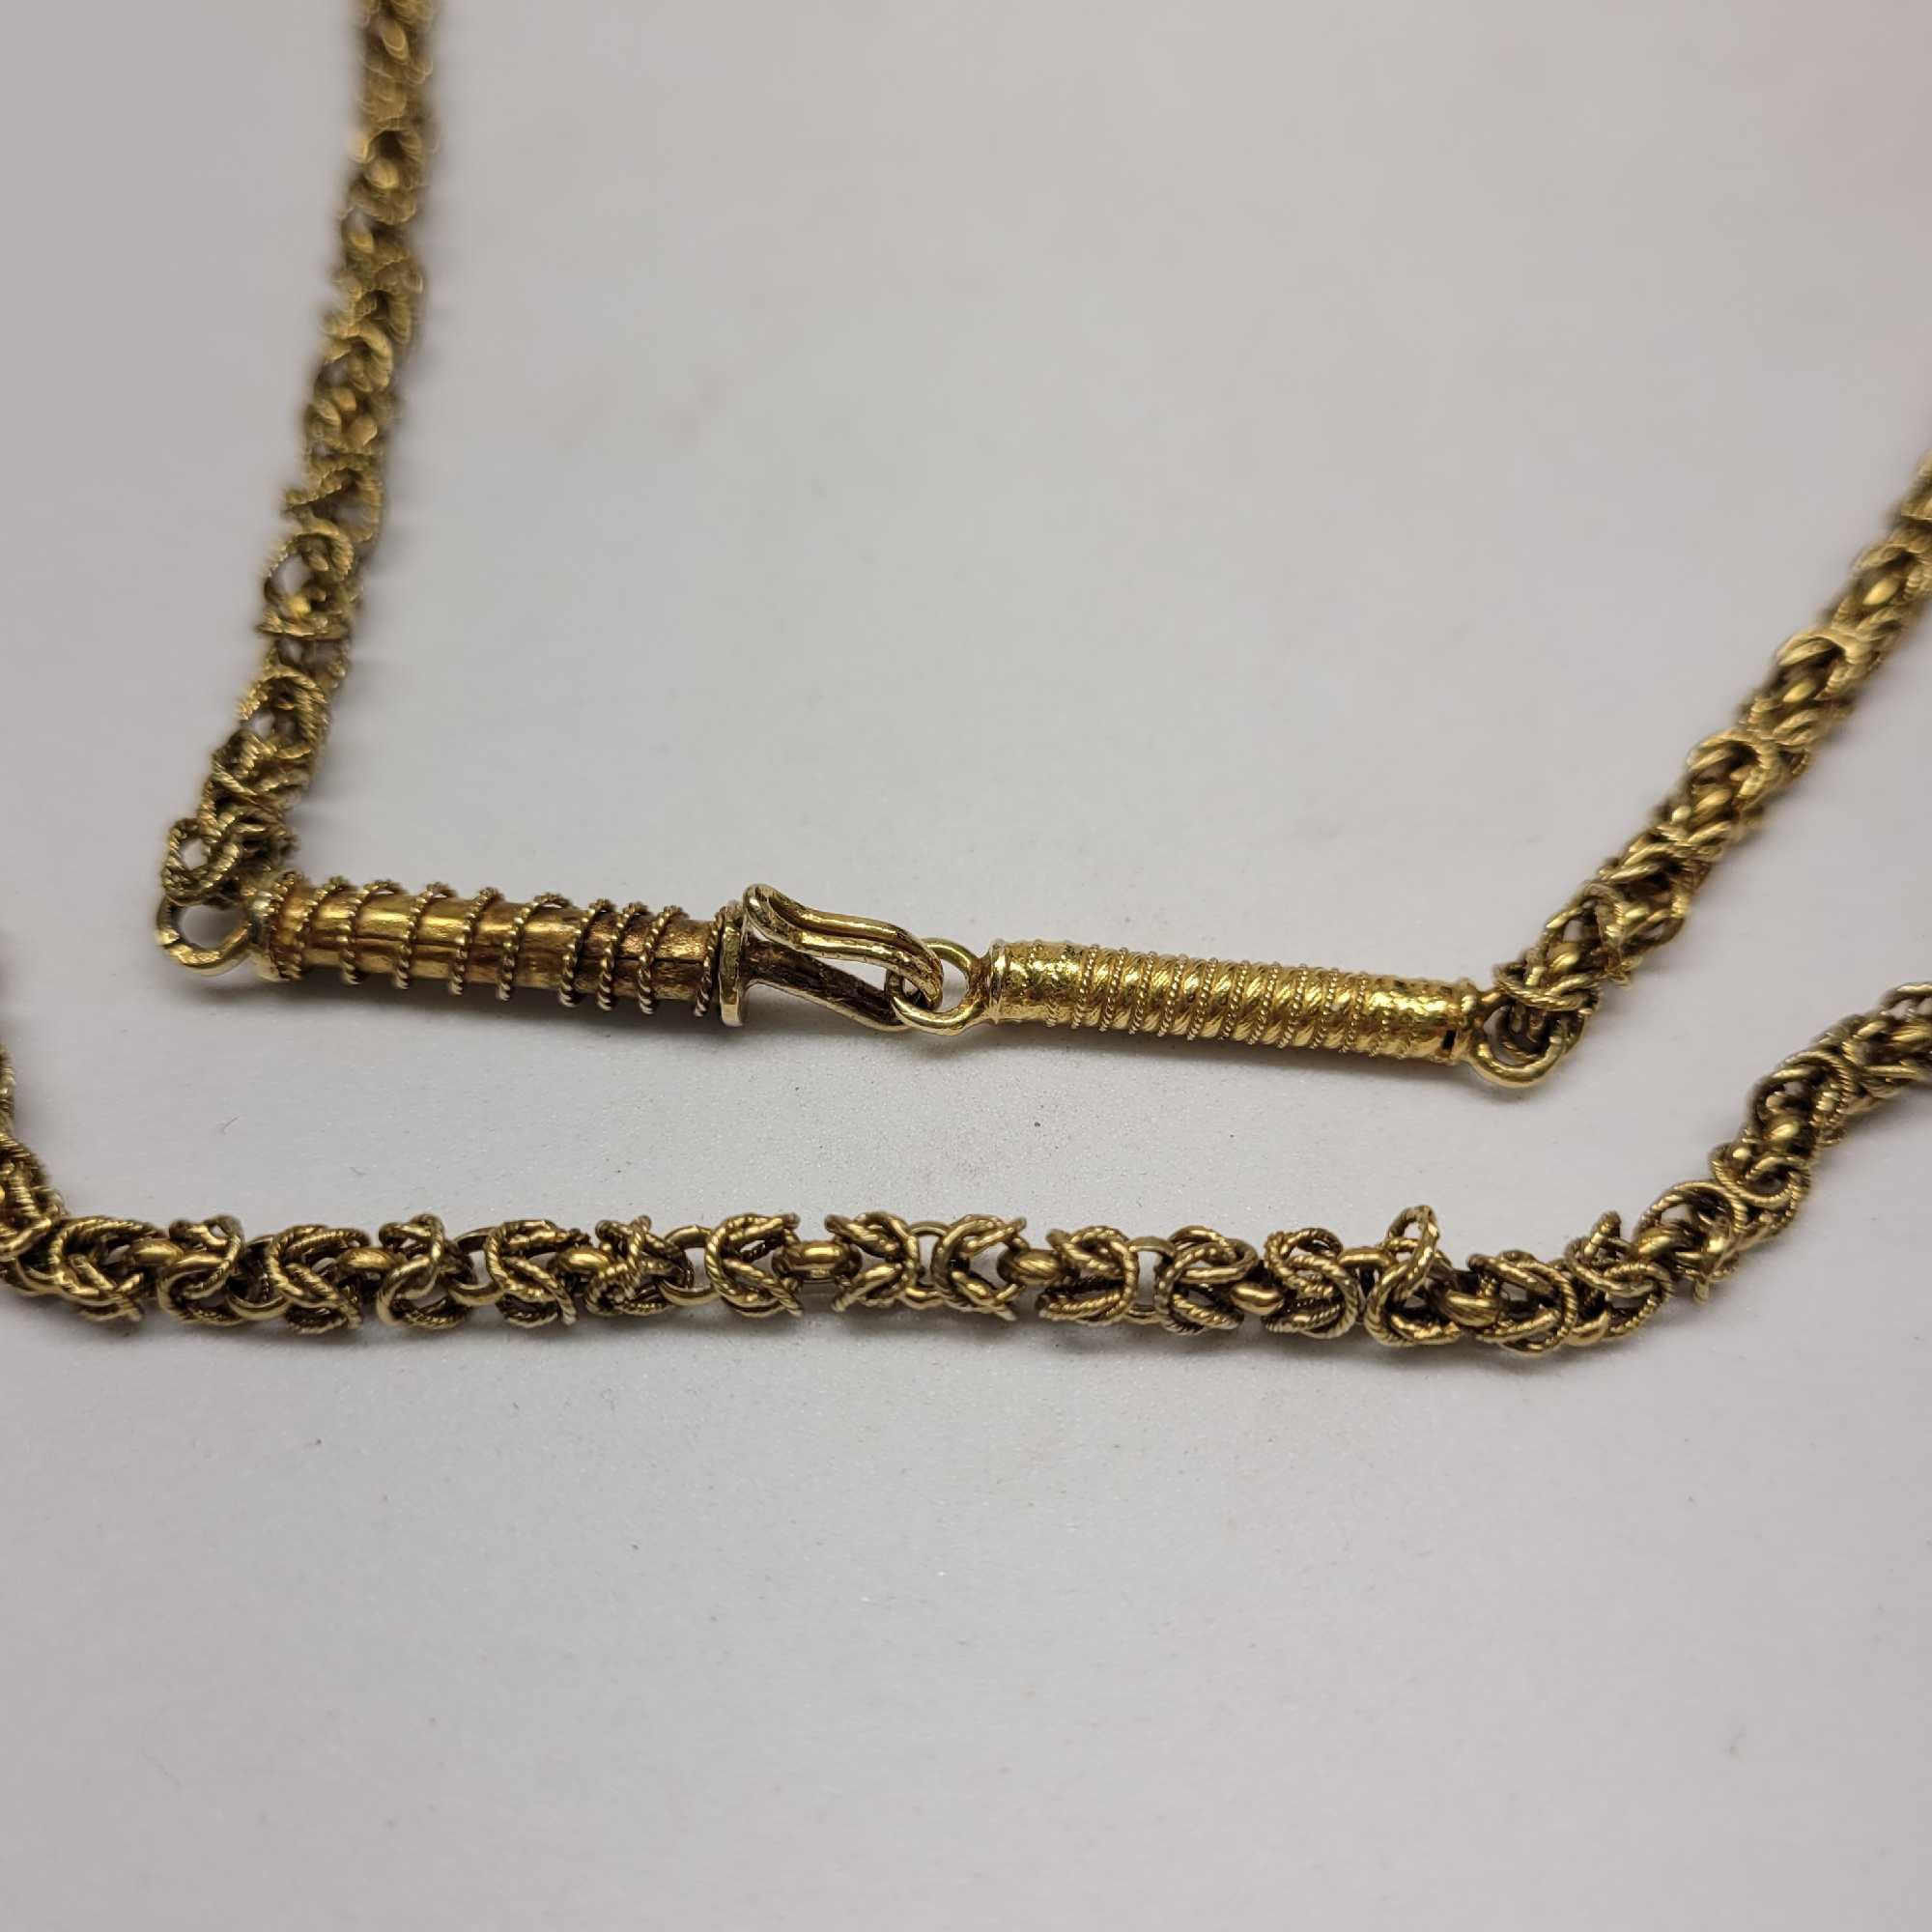 Stunning 18k Gold necklace